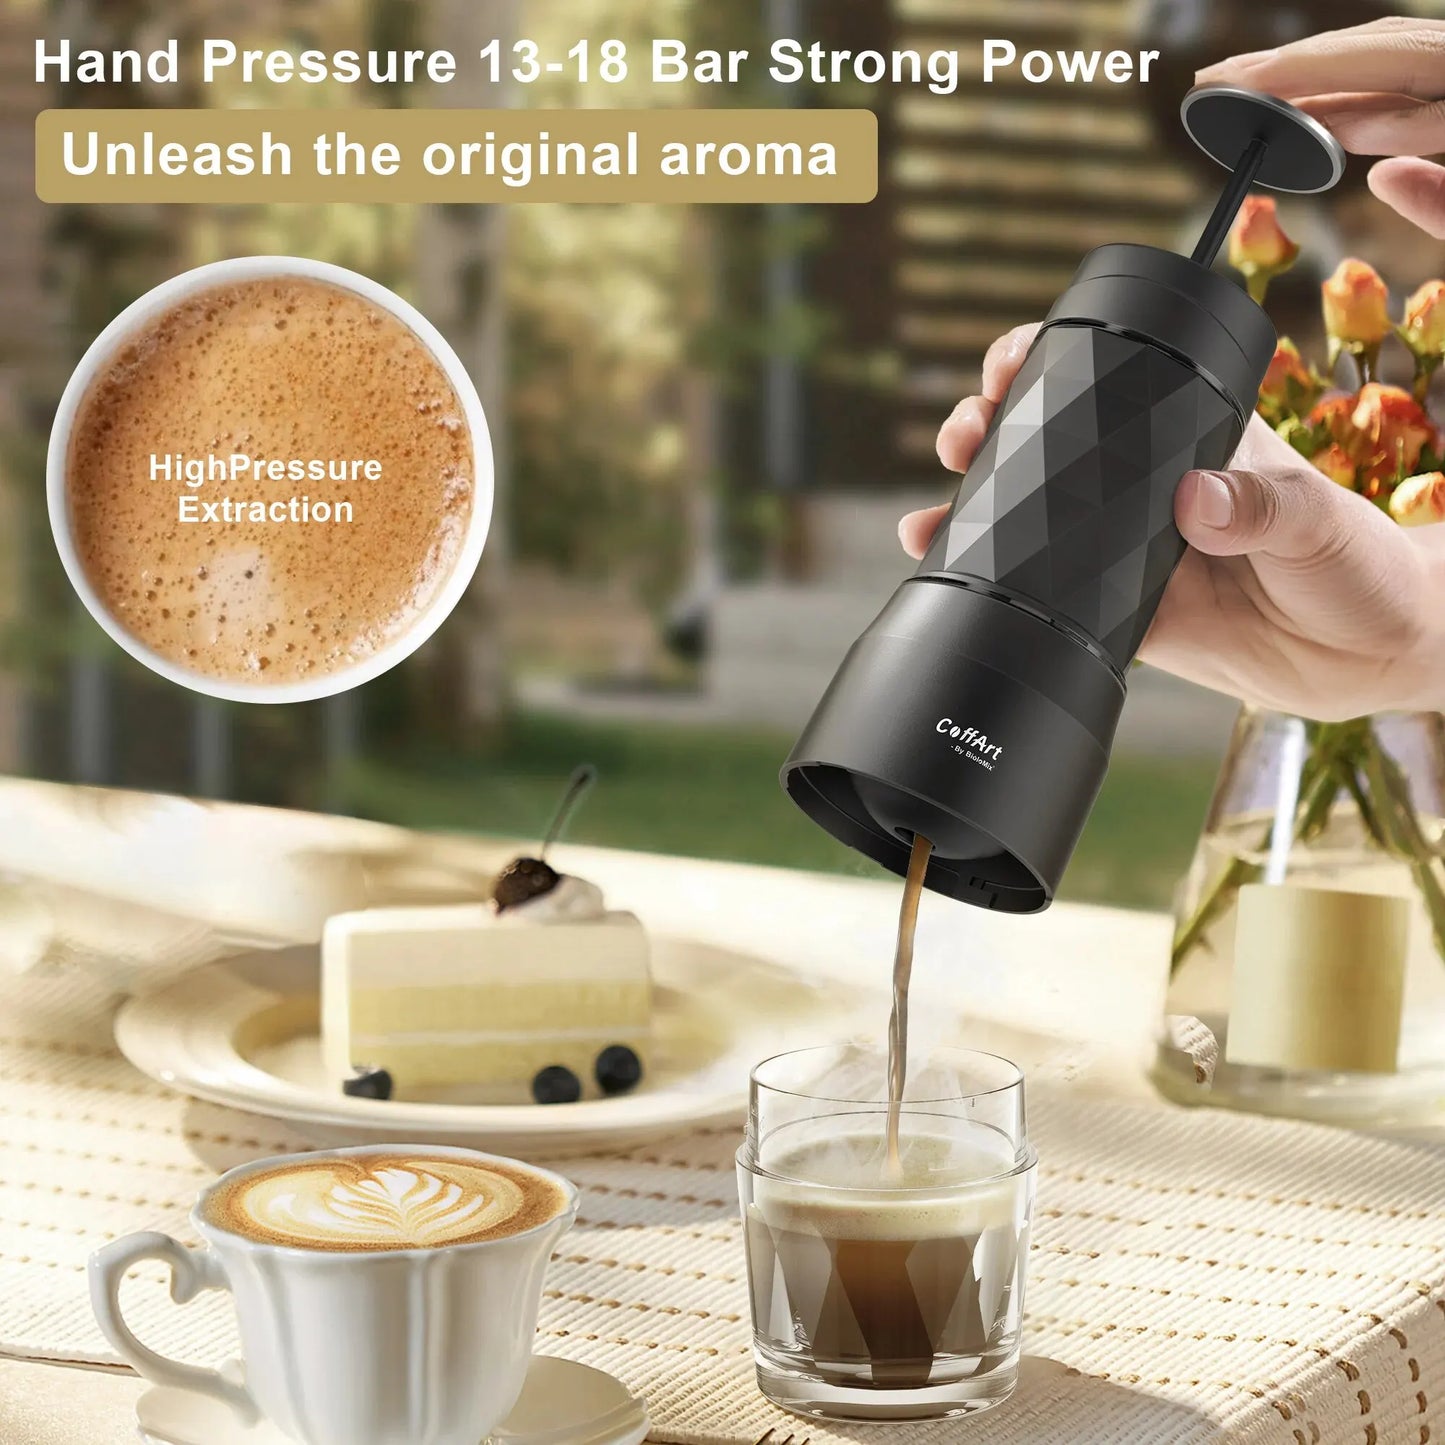 Portable Coffee Maker Espresso Machine Hand Press Capsule Ground Coffee Brewer Portable for Travel and Picnic,BioloMix